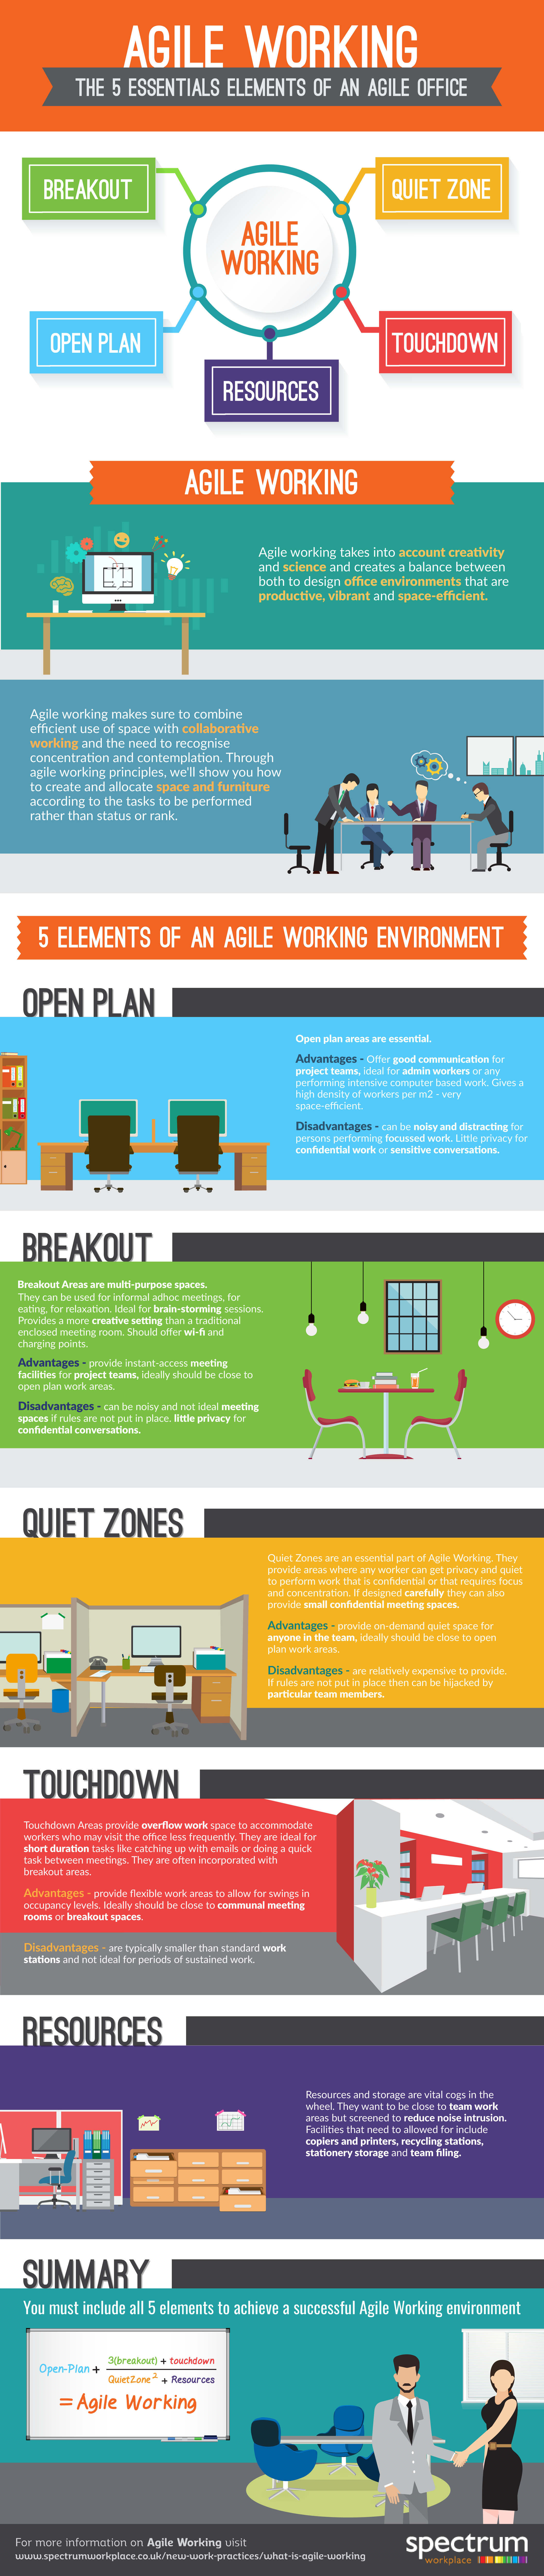 Agile Working Infographic